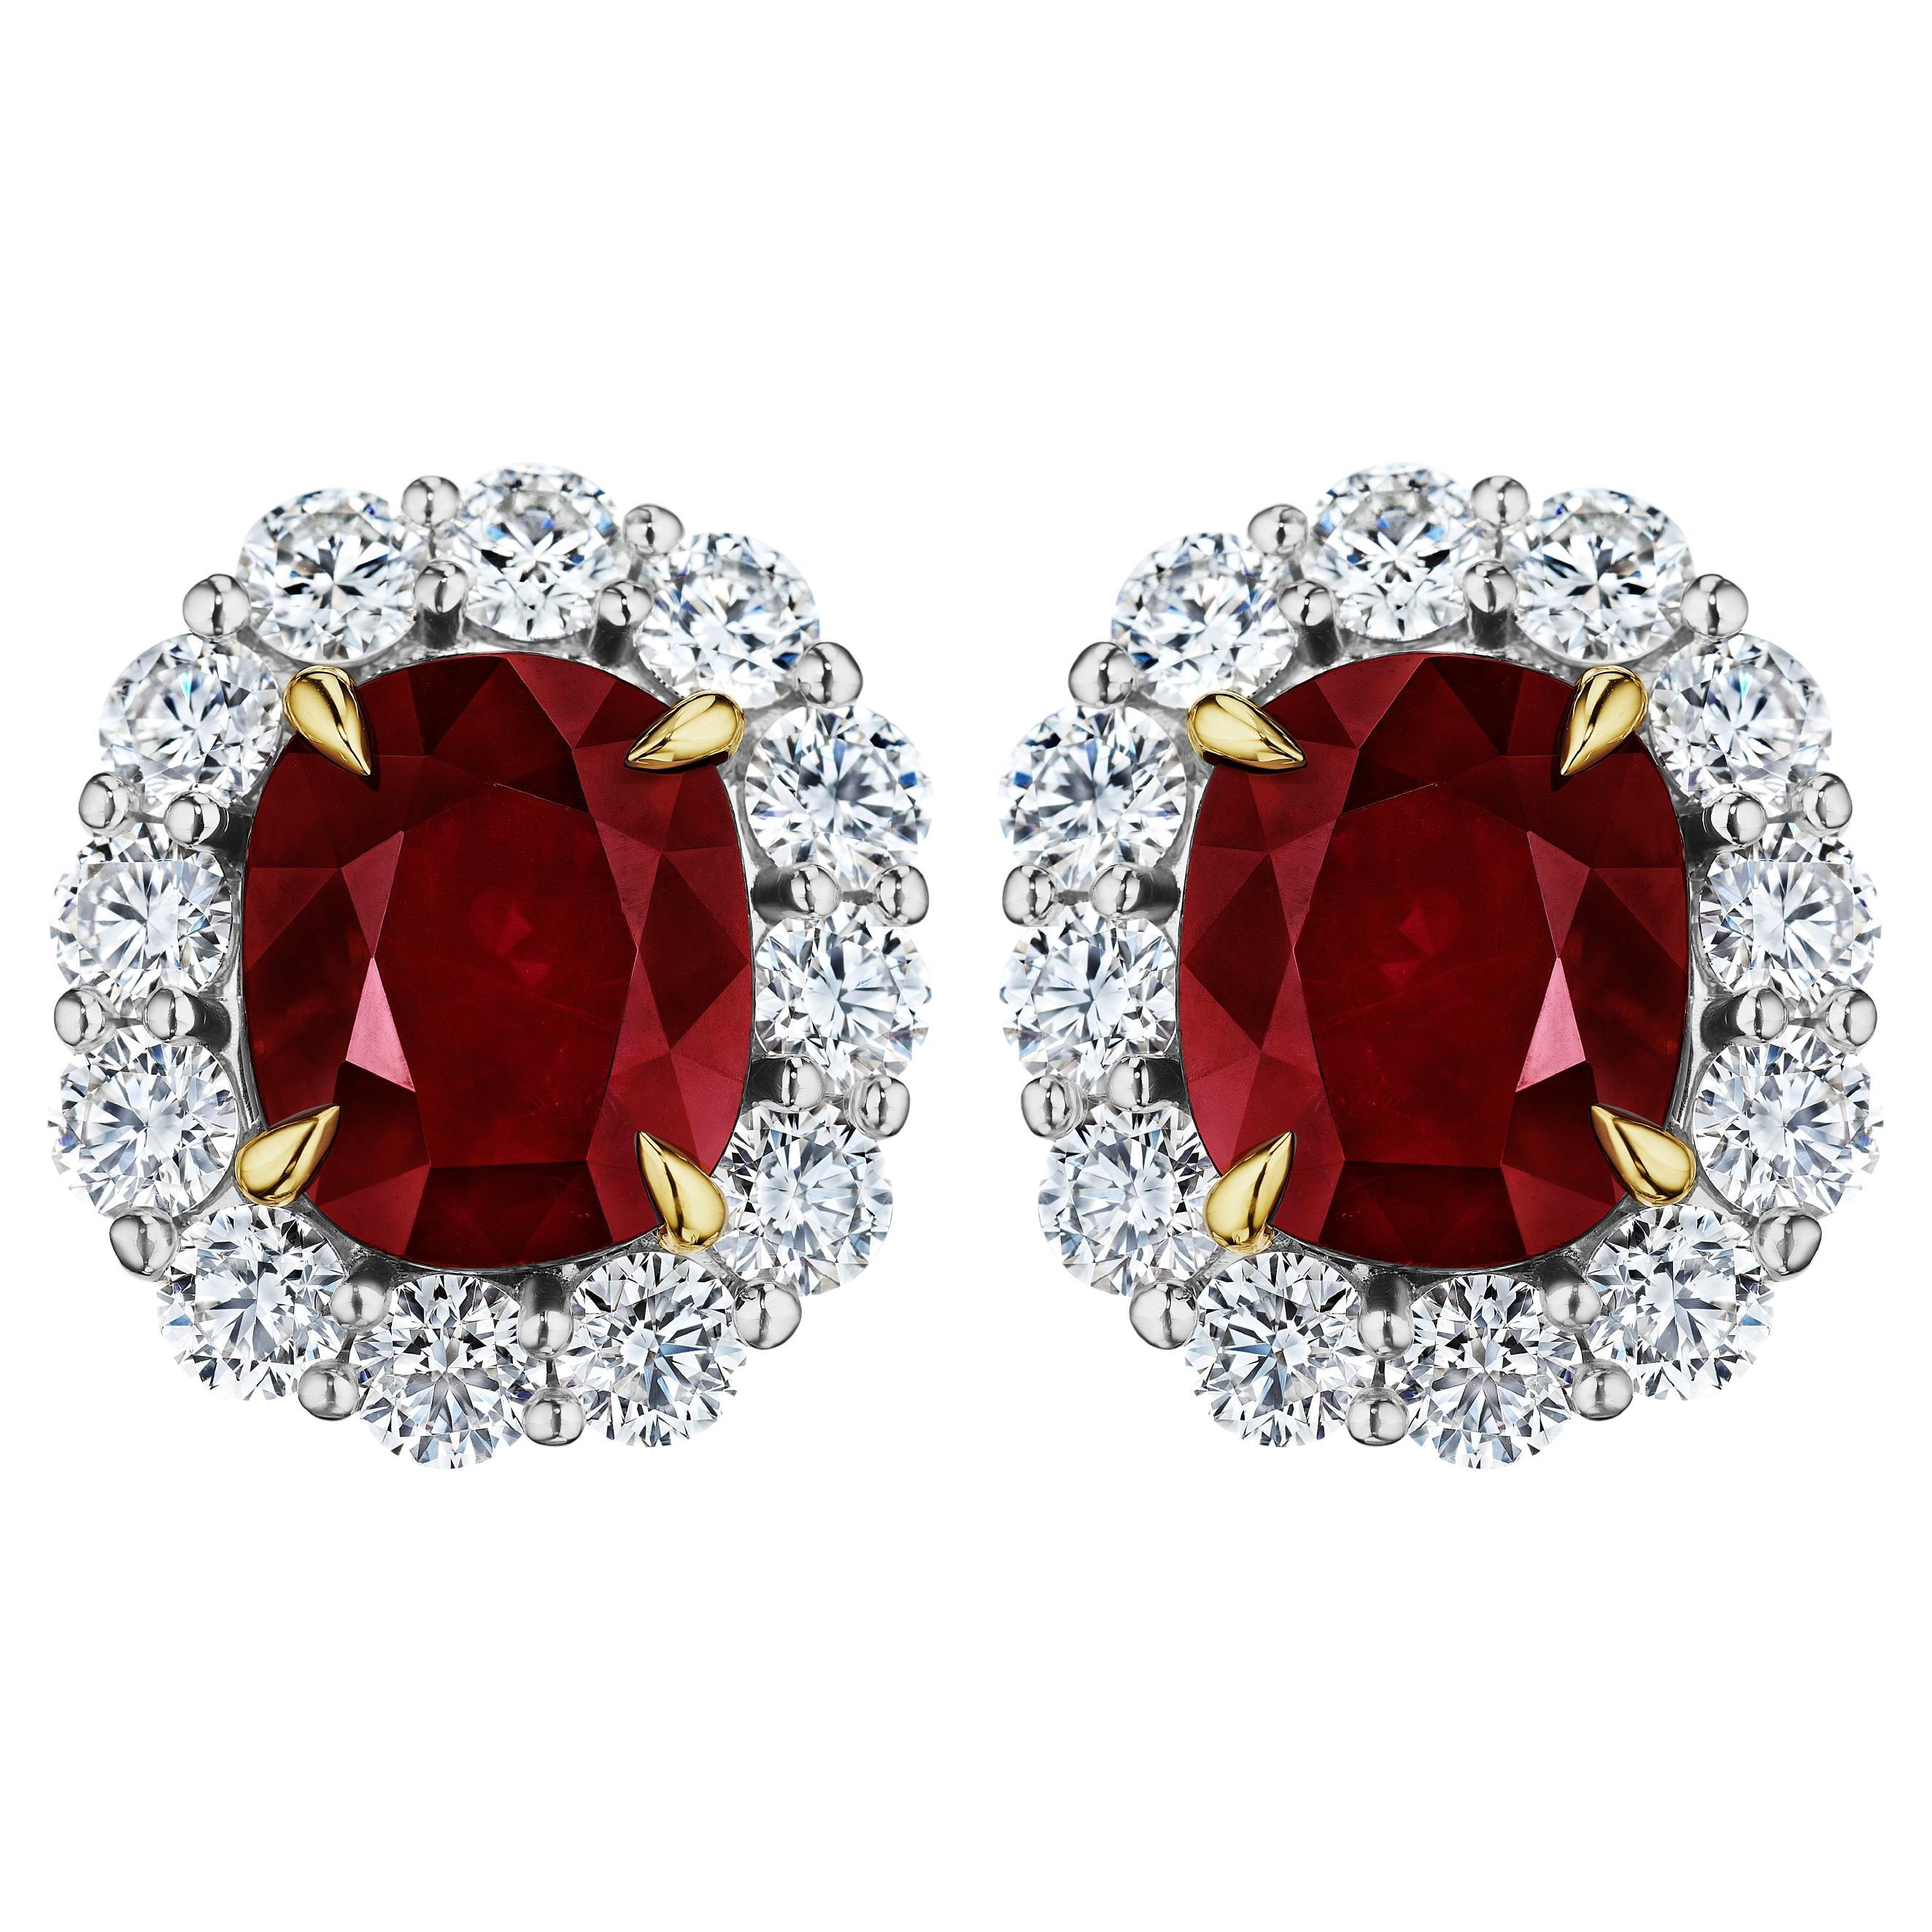 13.34ct GRS Certified Ruby & Diamond Earrings in Platinum & 18KT Gold For Sale